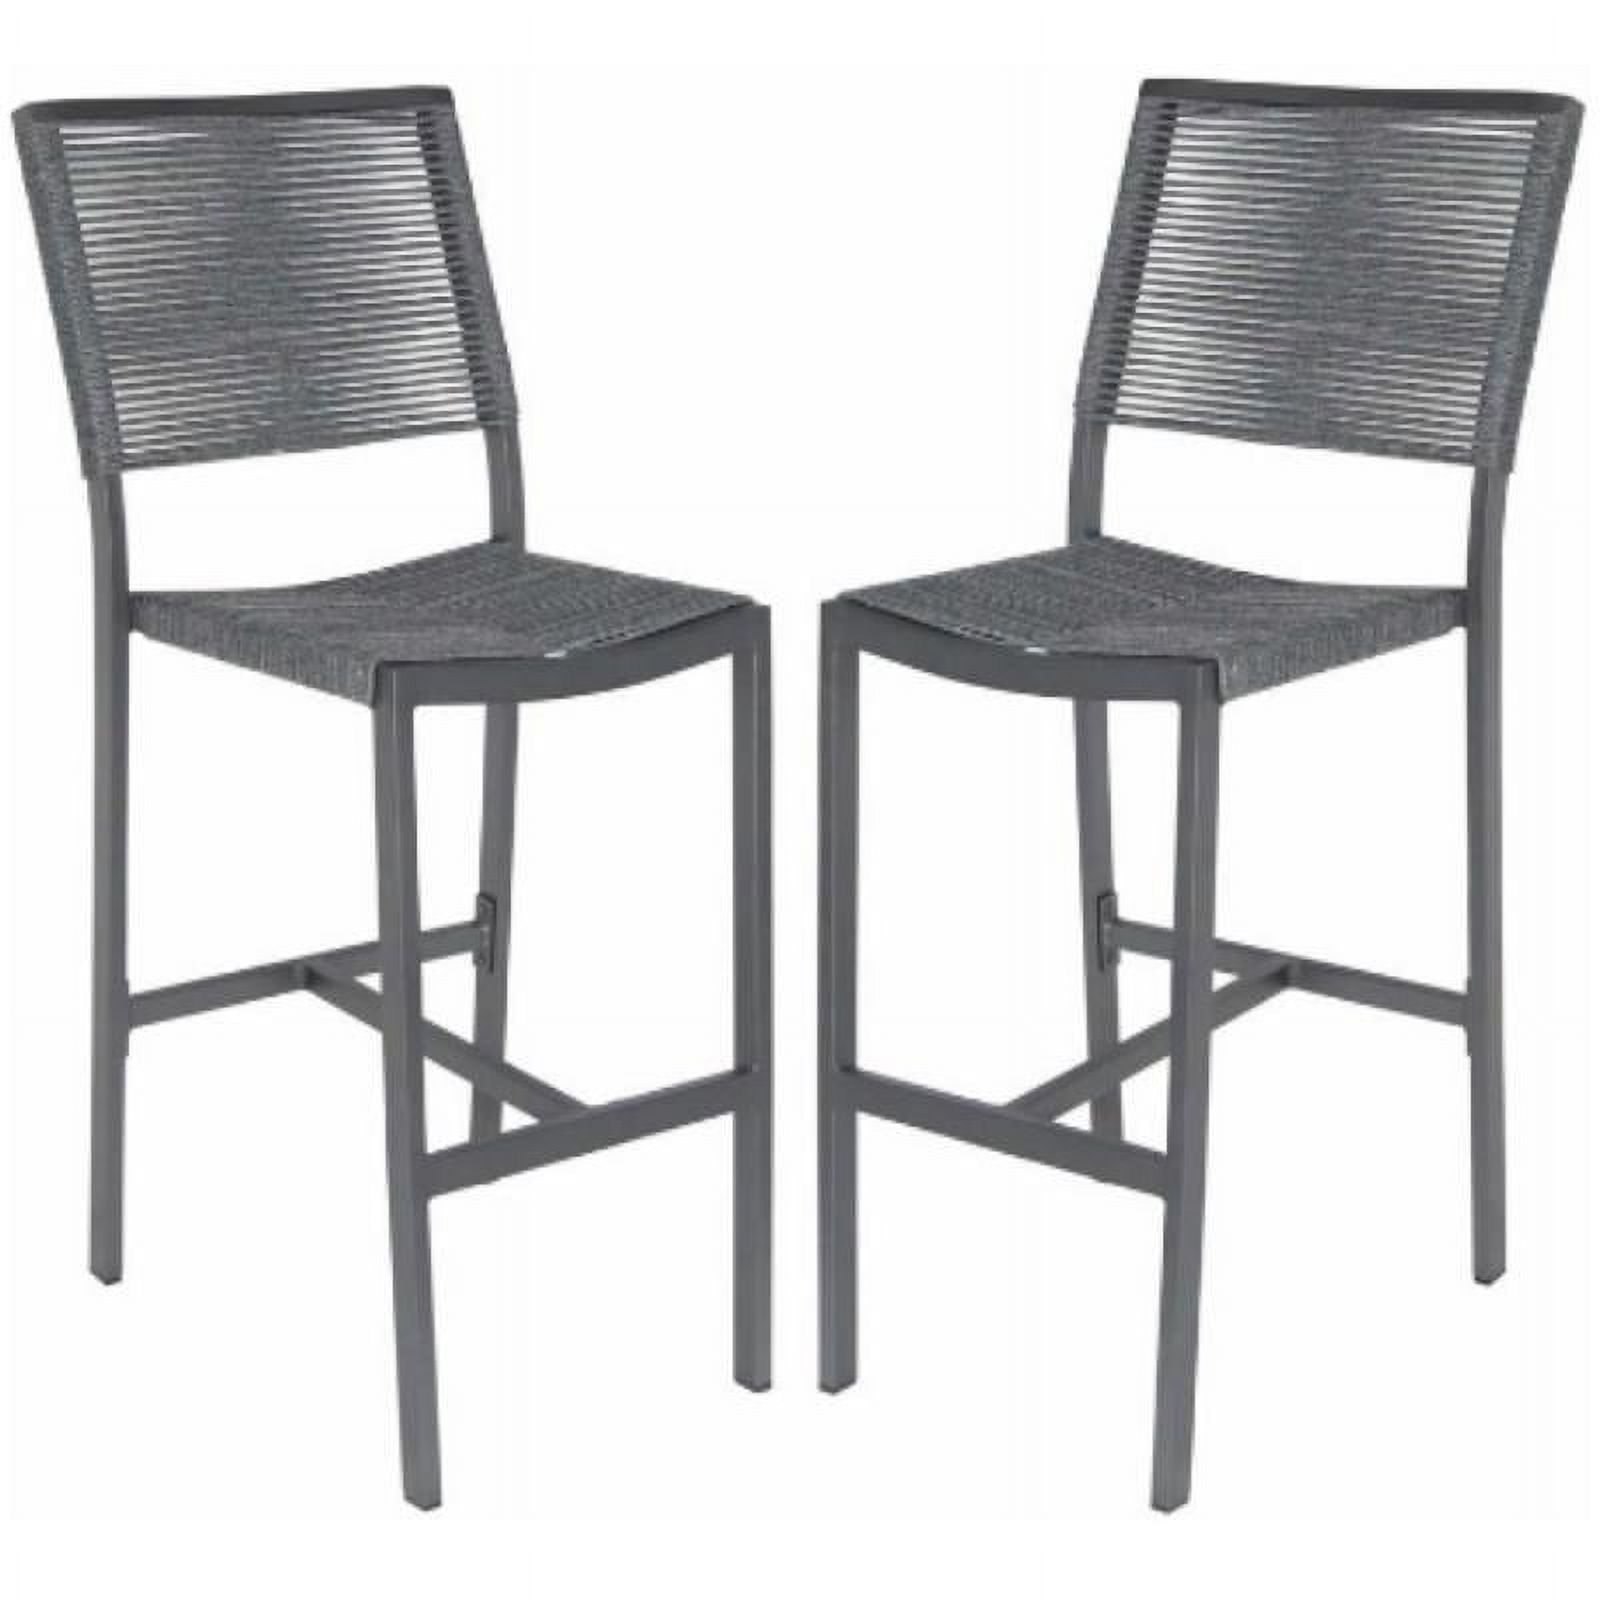 Home Square Aluminum Patio Bar Side Stool in Charcoal Rope - Set of 2 - image 1 of 2